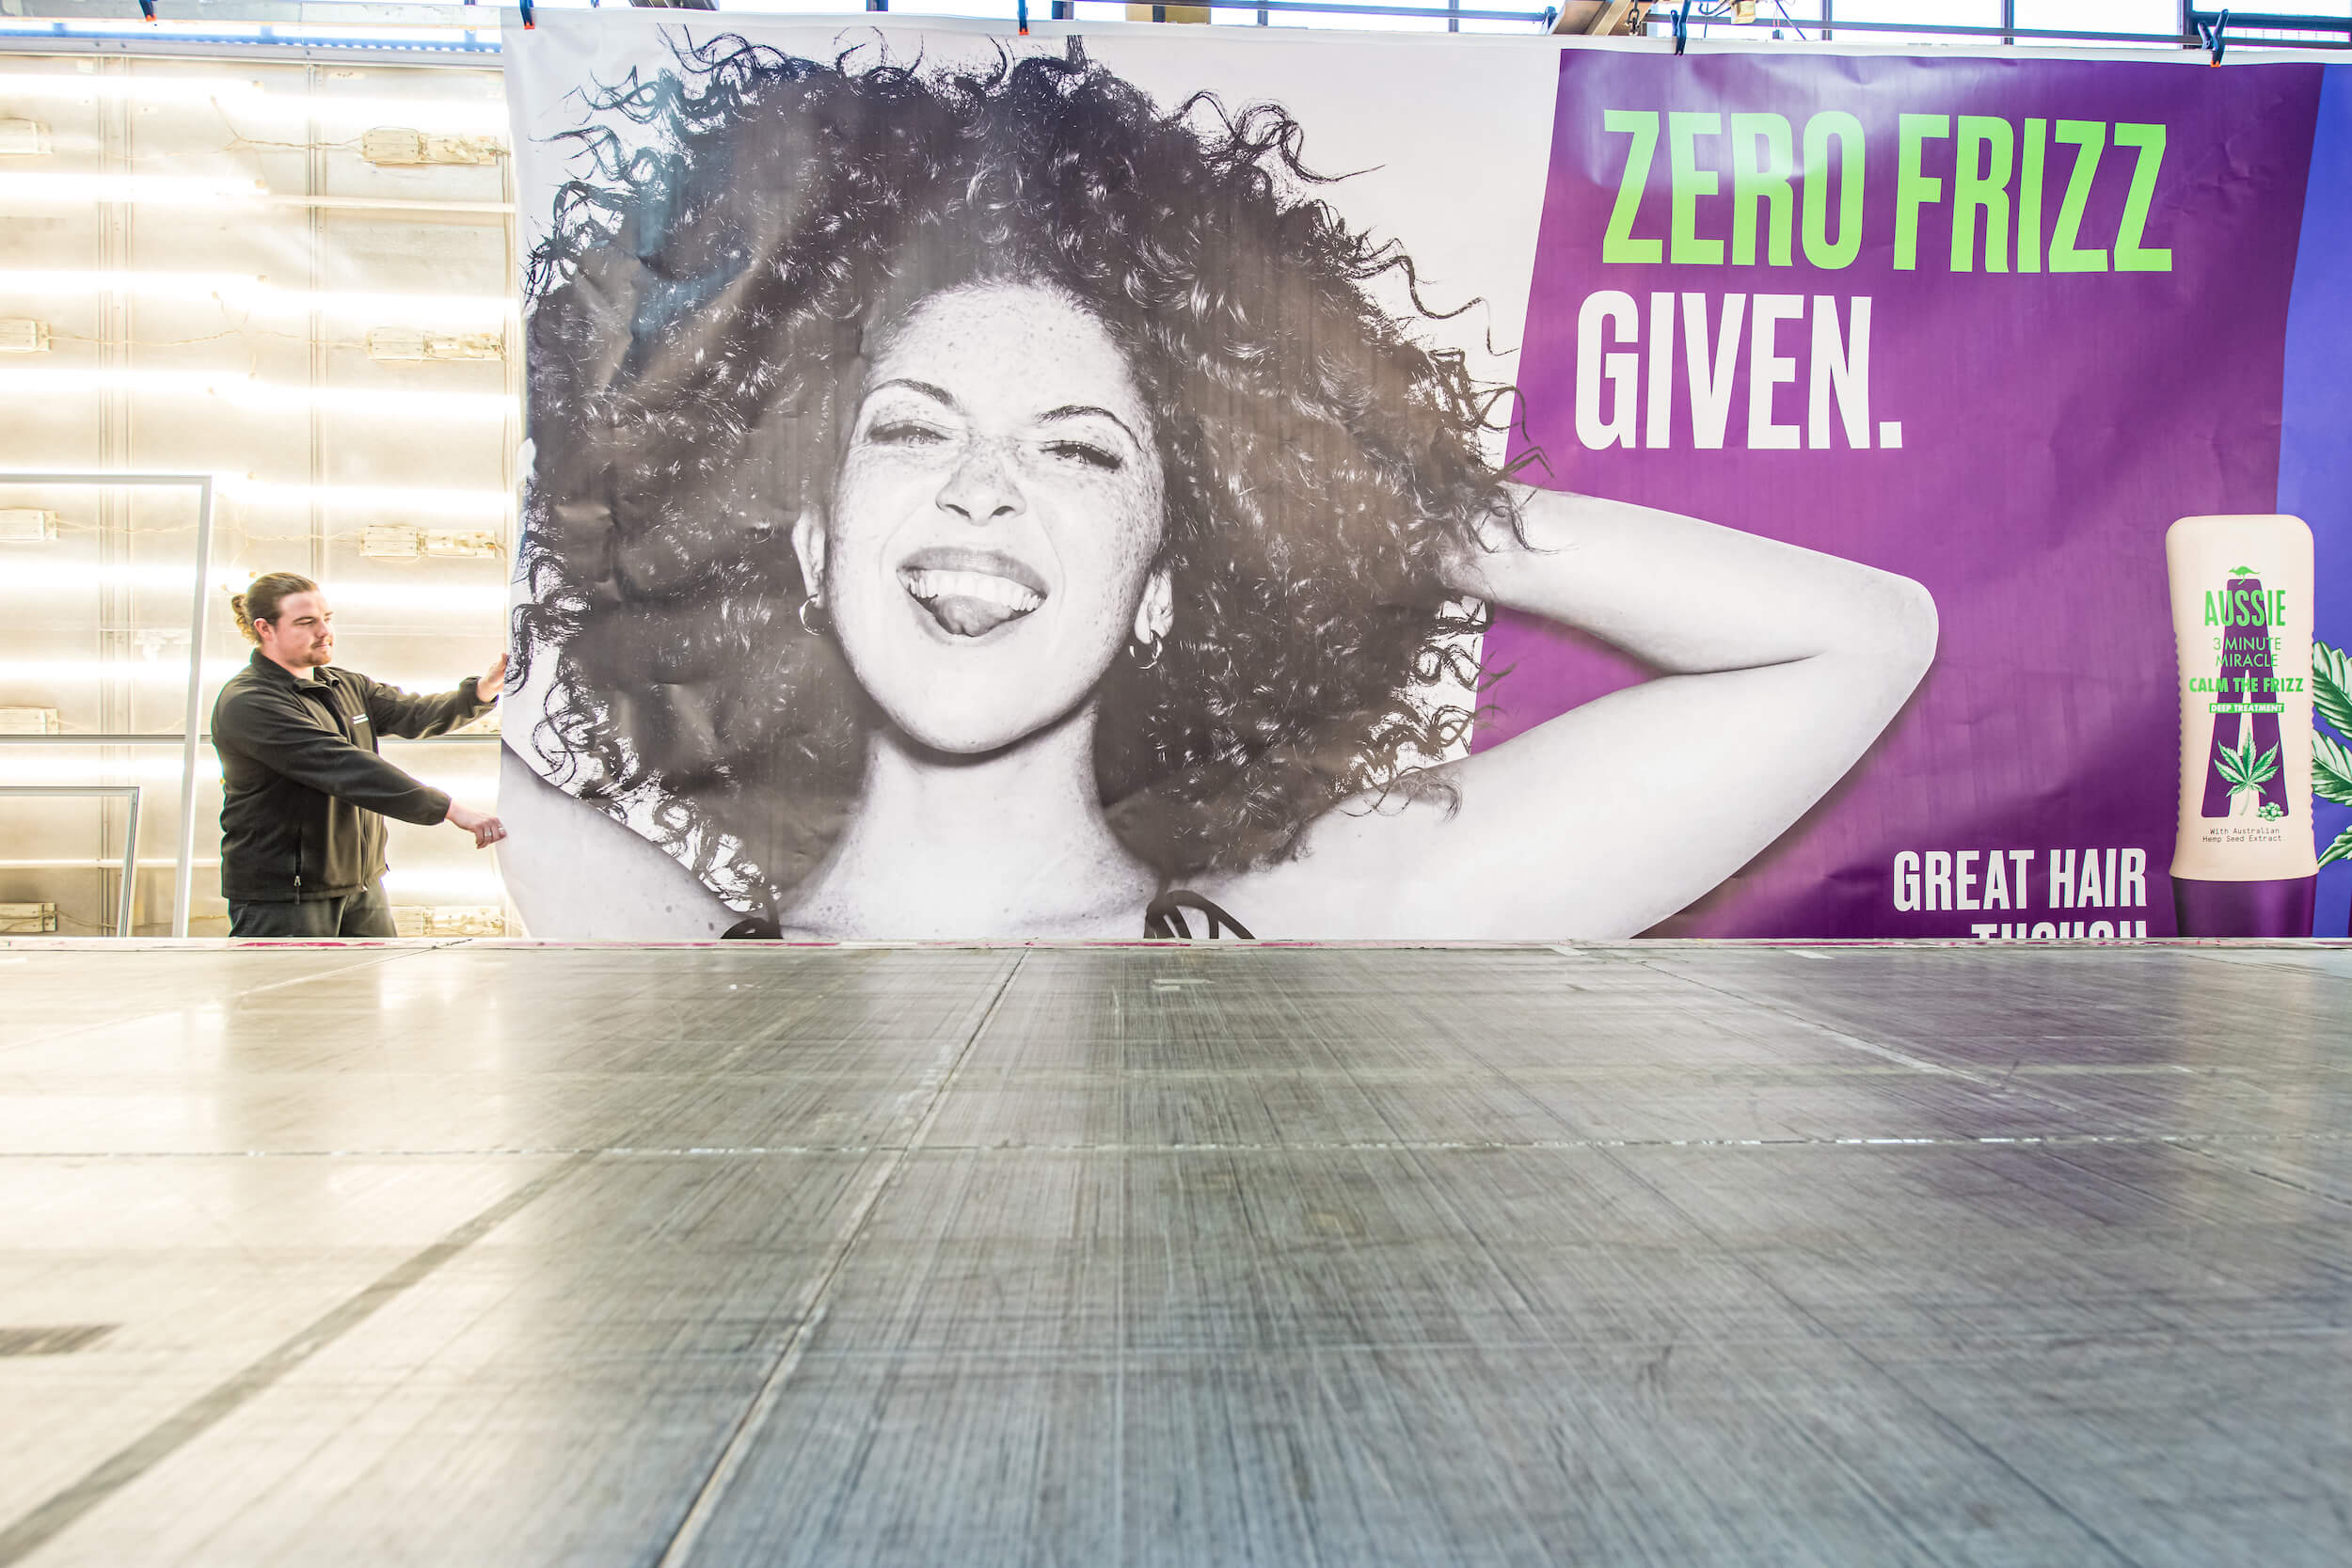 Large outdoor banner showing advertising for shampoo